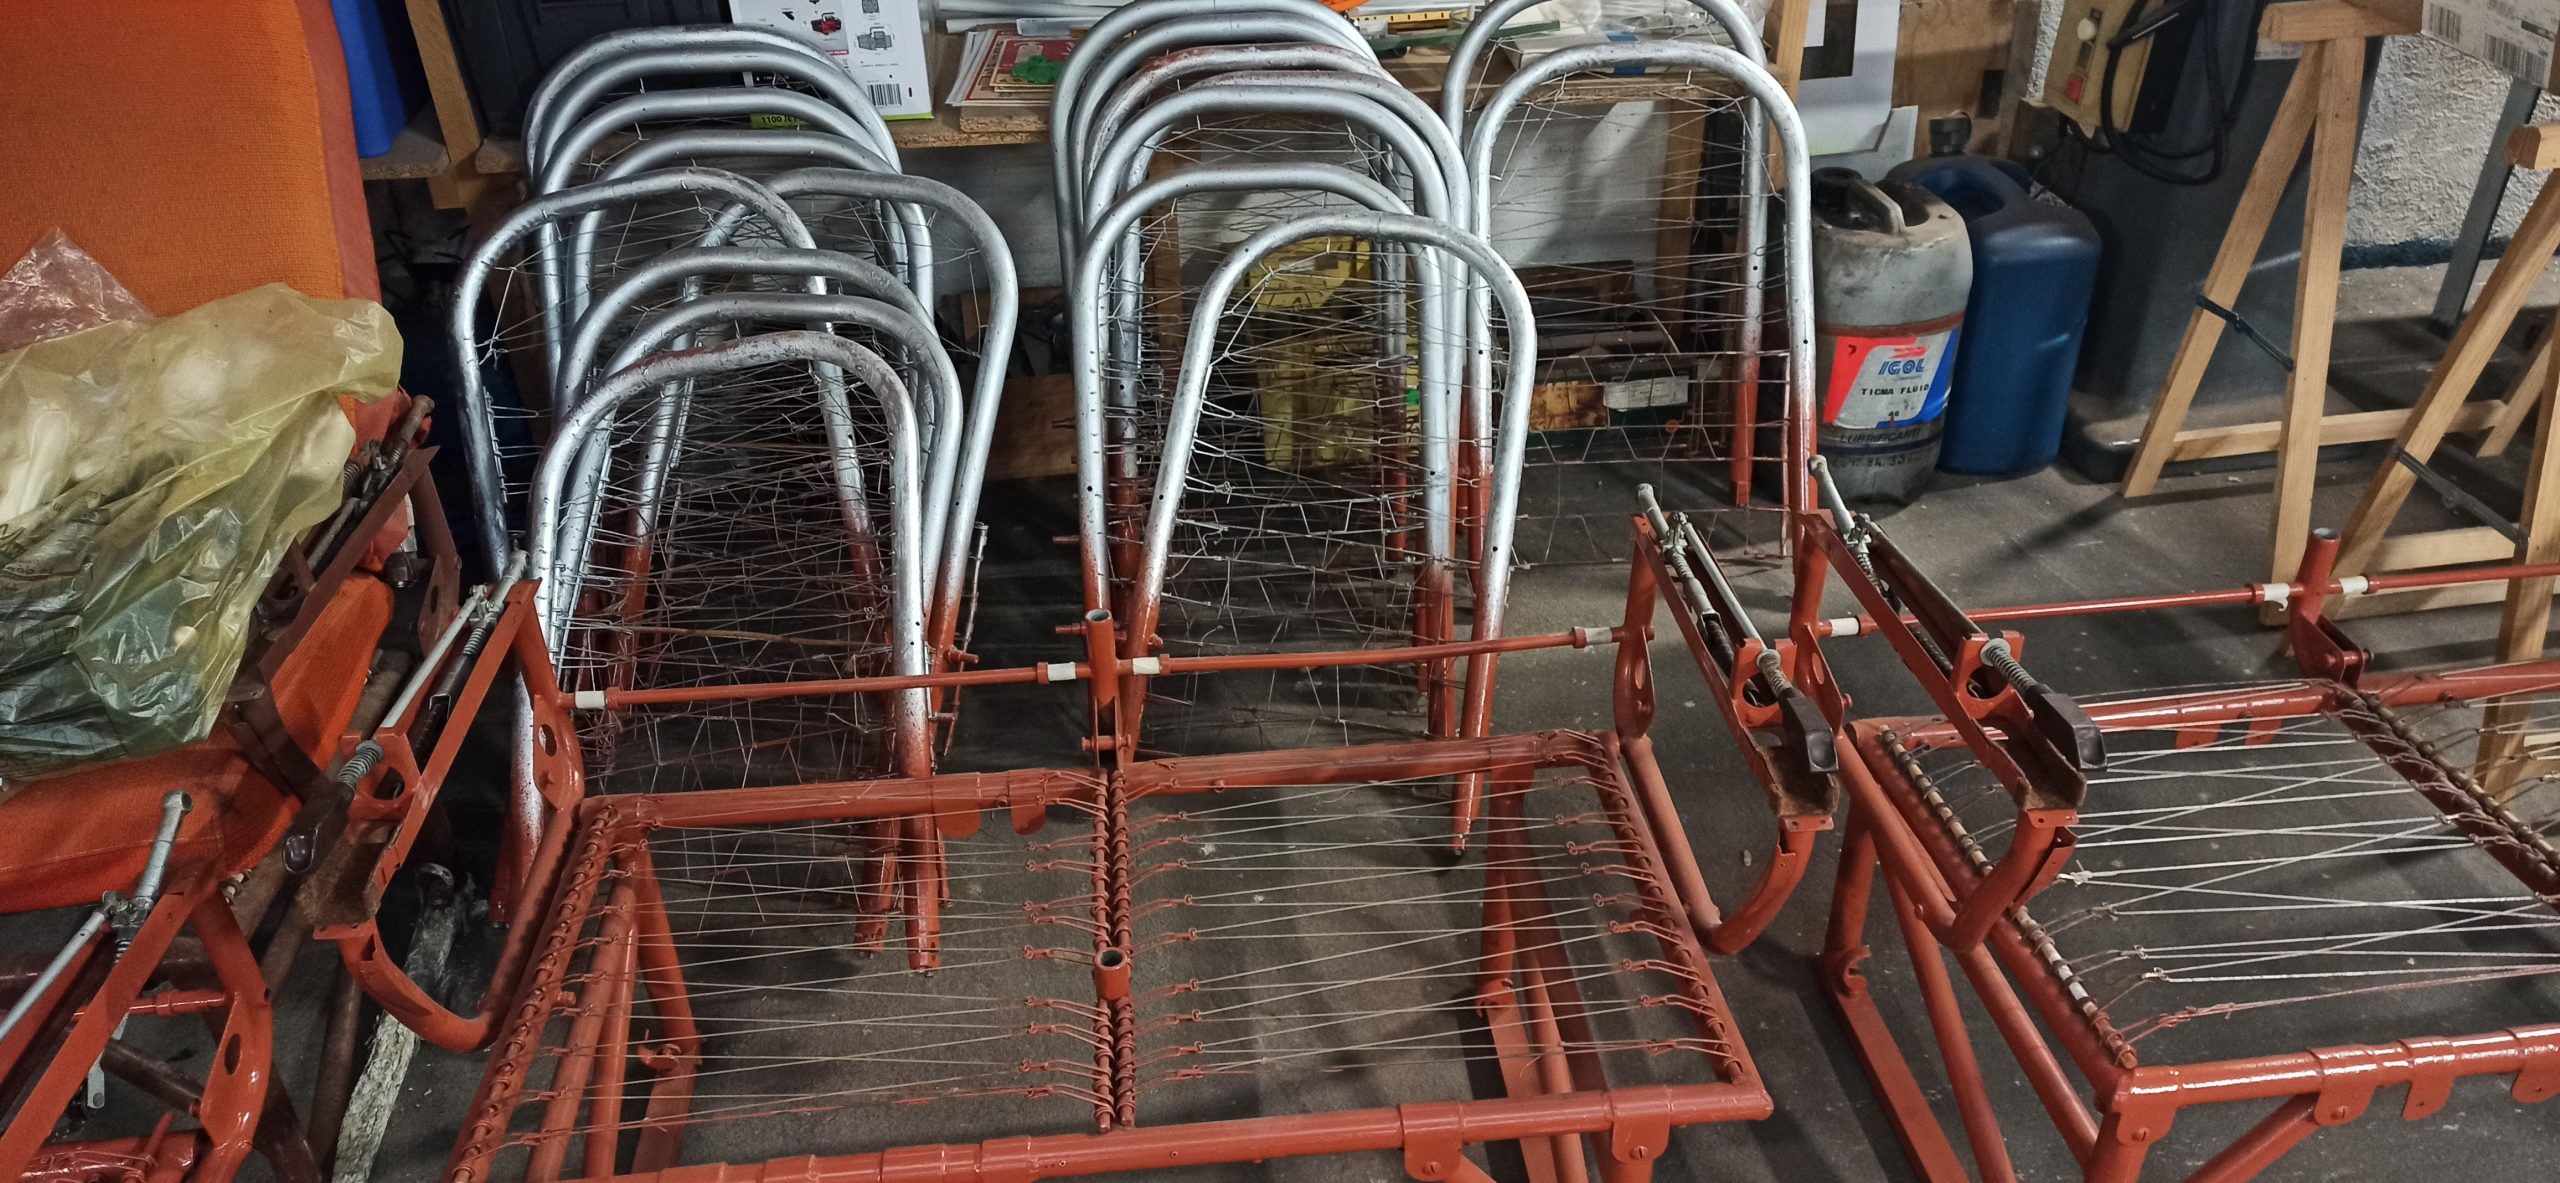 Super Constellation 2-seater airplane seats in restoration. Backs awaiting assembly